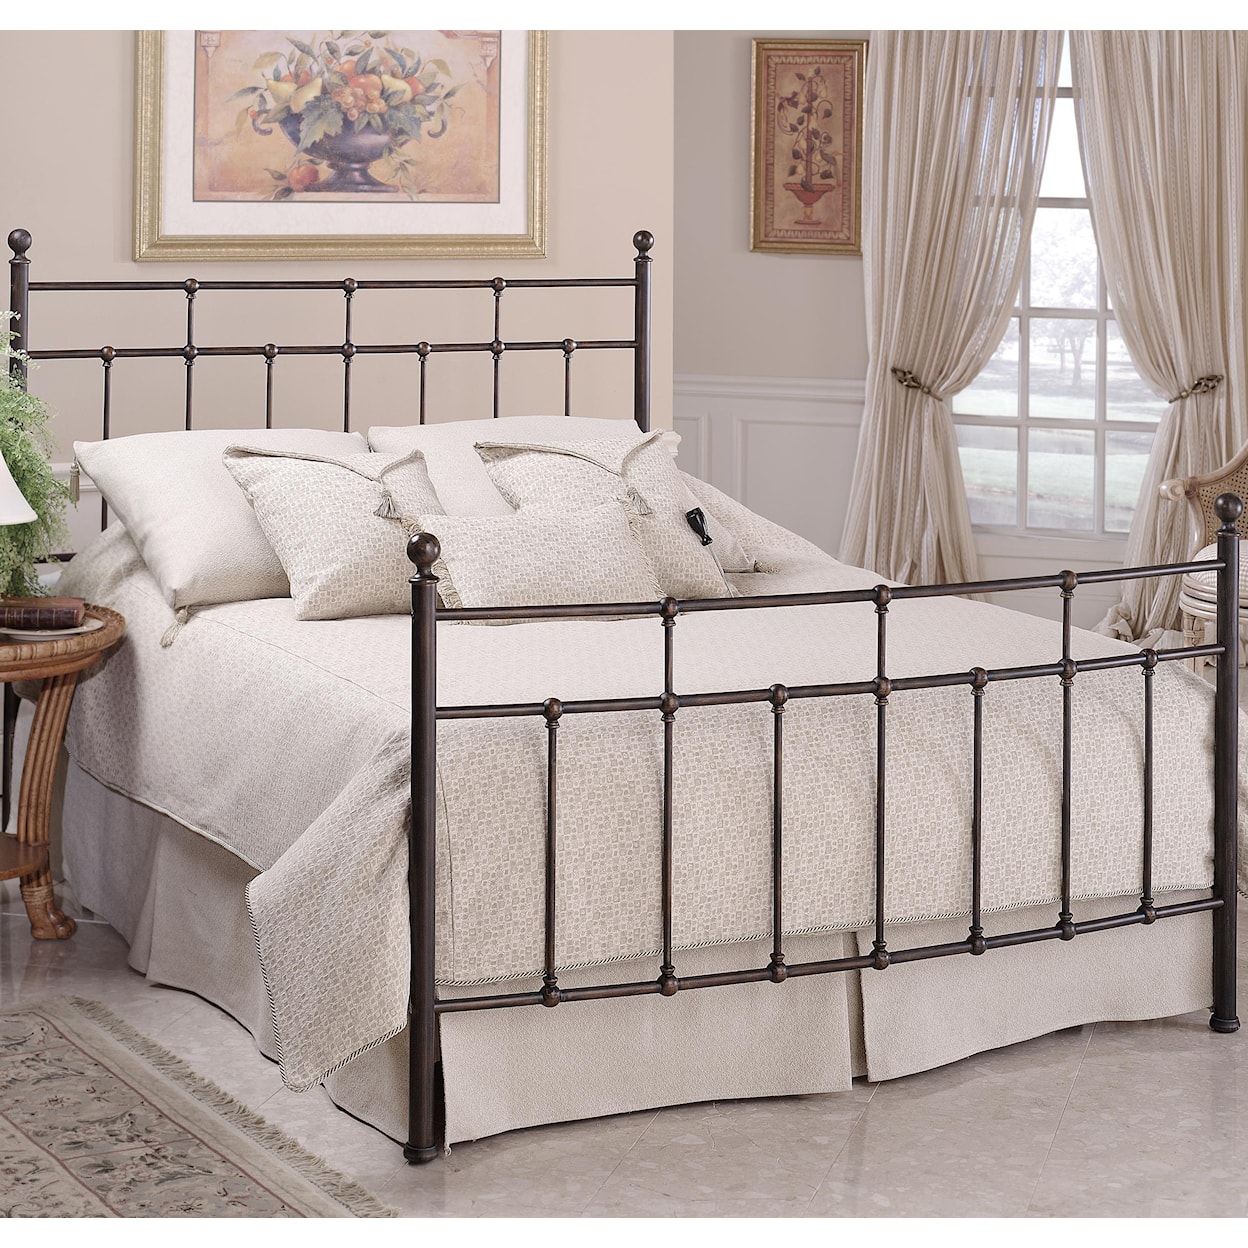 Hillsdale Metal Beds King Providence Bed